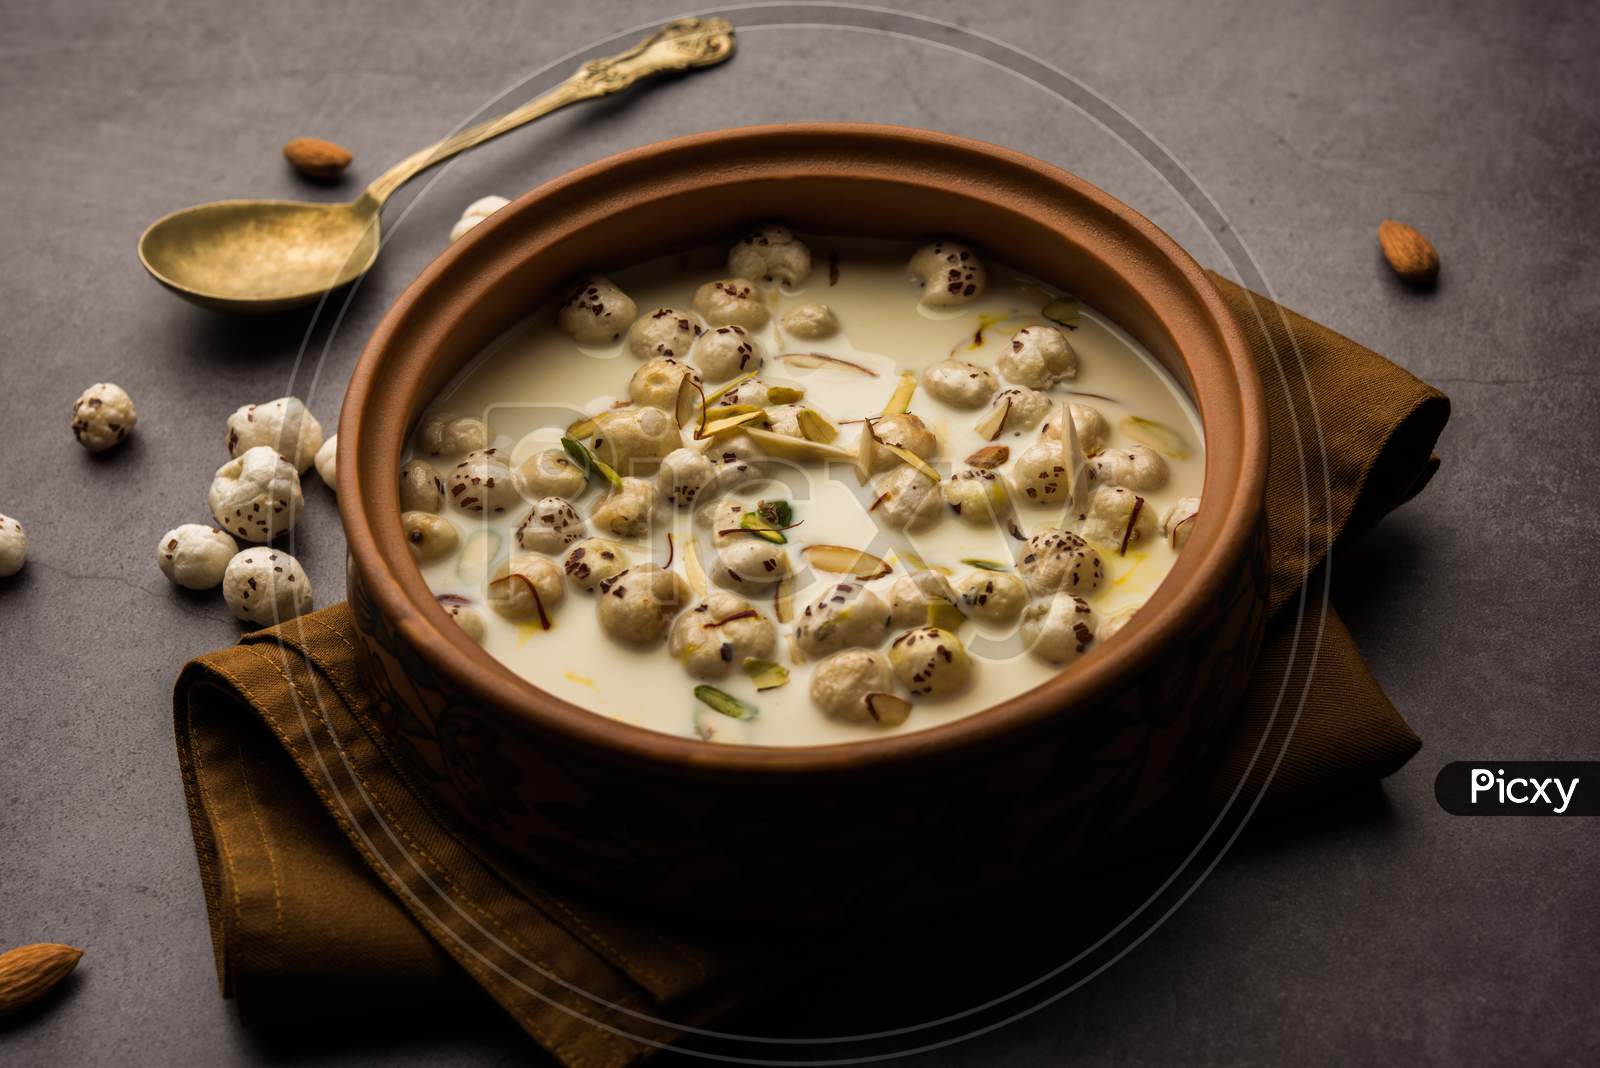 Puffed Lotus Seed Pudding Is Also Known As Makhana Kheer Or Foxnut Payasam, Indian Dessert